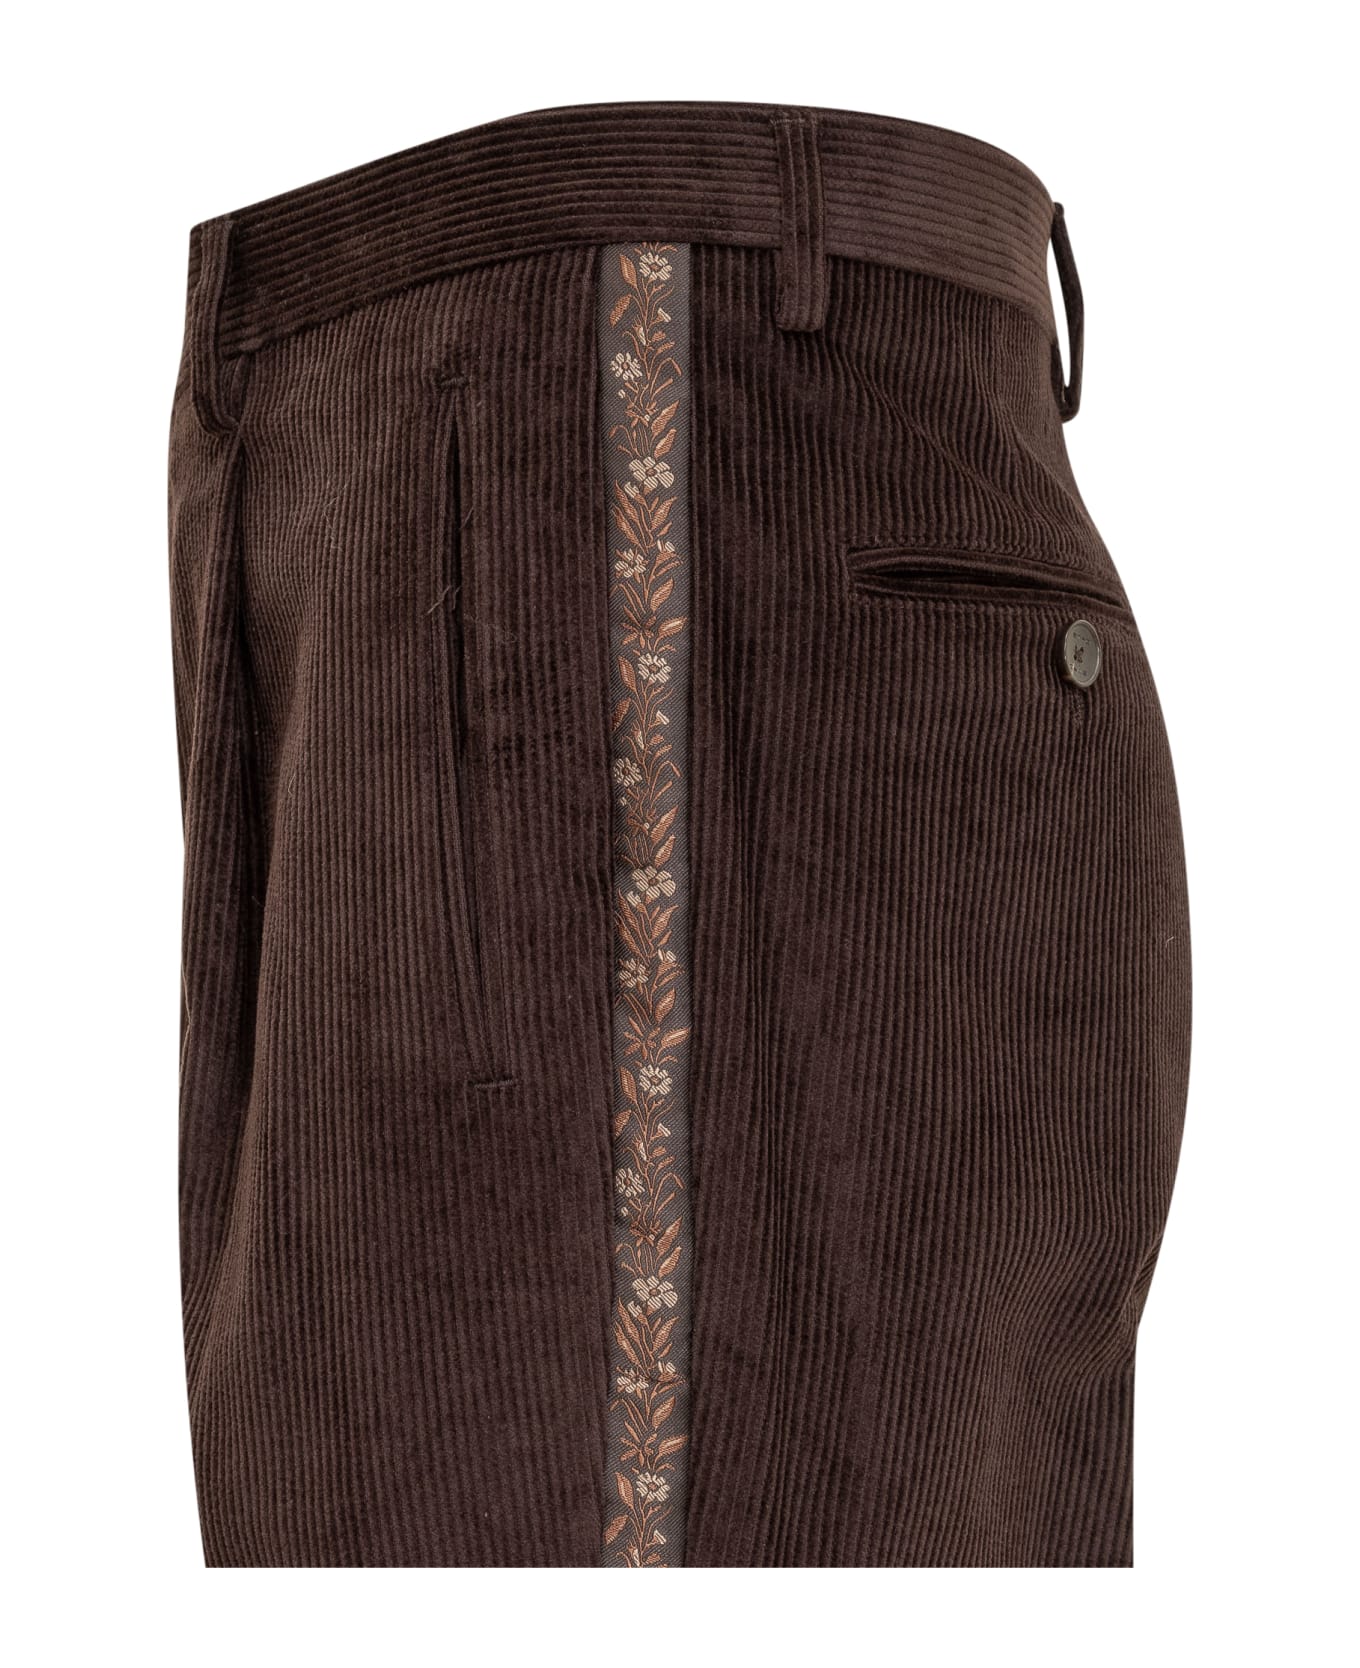 Etro 1 Pince Trousers - MARRONE ボトムス